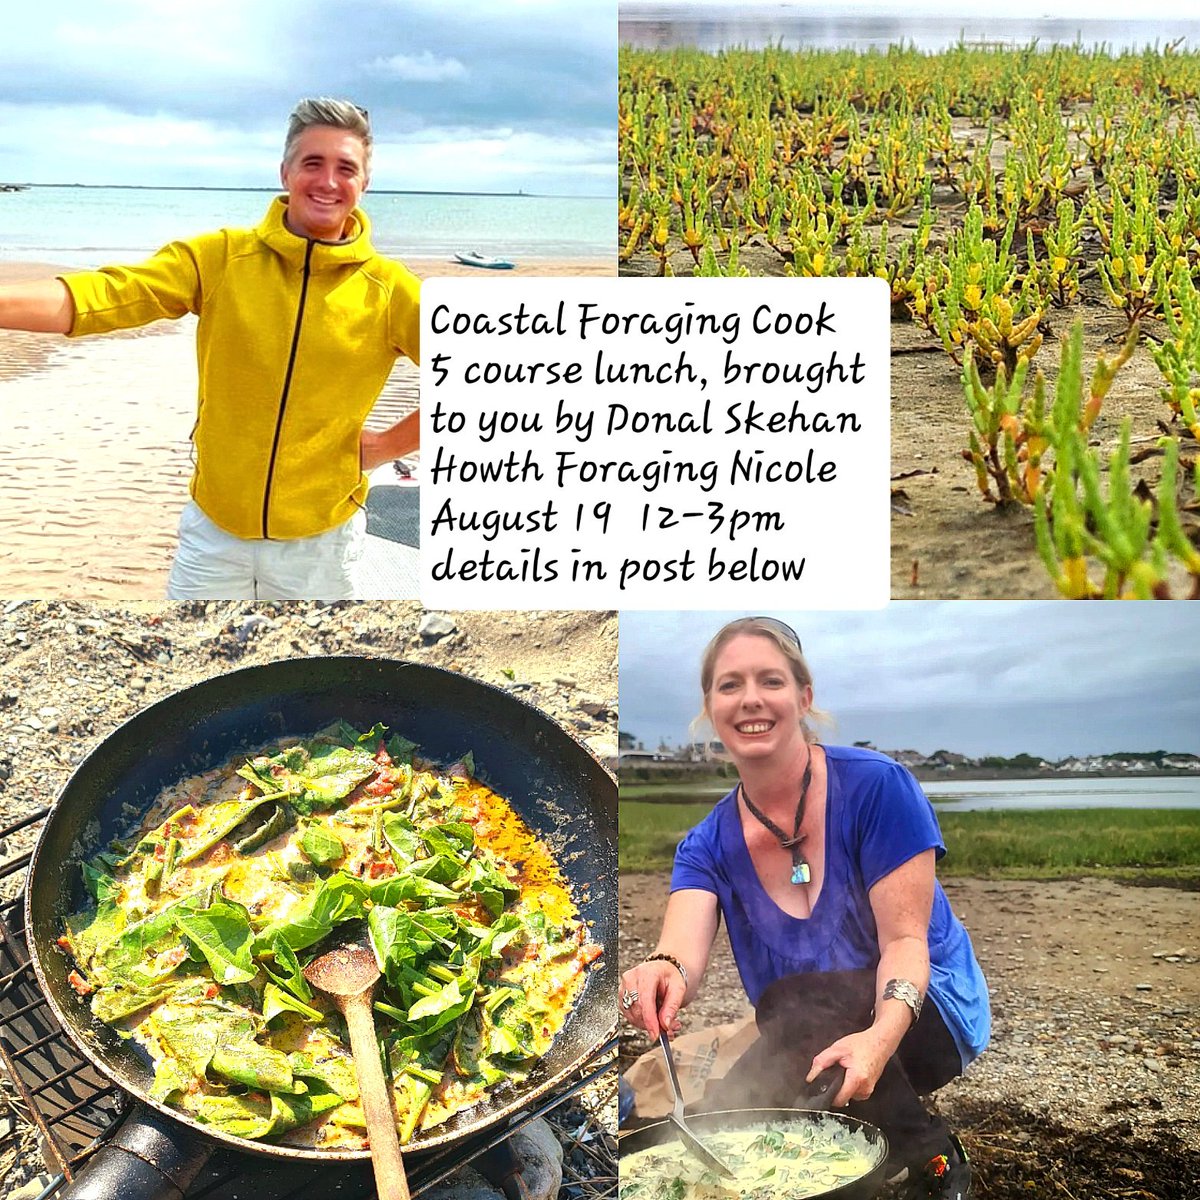 @HowthForaging Coastal Foraging and Cook August Saturday 19th 12 - 3 pm Donal Skehan and Nicole Dunne, Howth Foraging bring you this unique culinary experience. Join us on a magical Coastal Foraging Tour, gathering the most delicious edible plants & herbs #foraging #howth